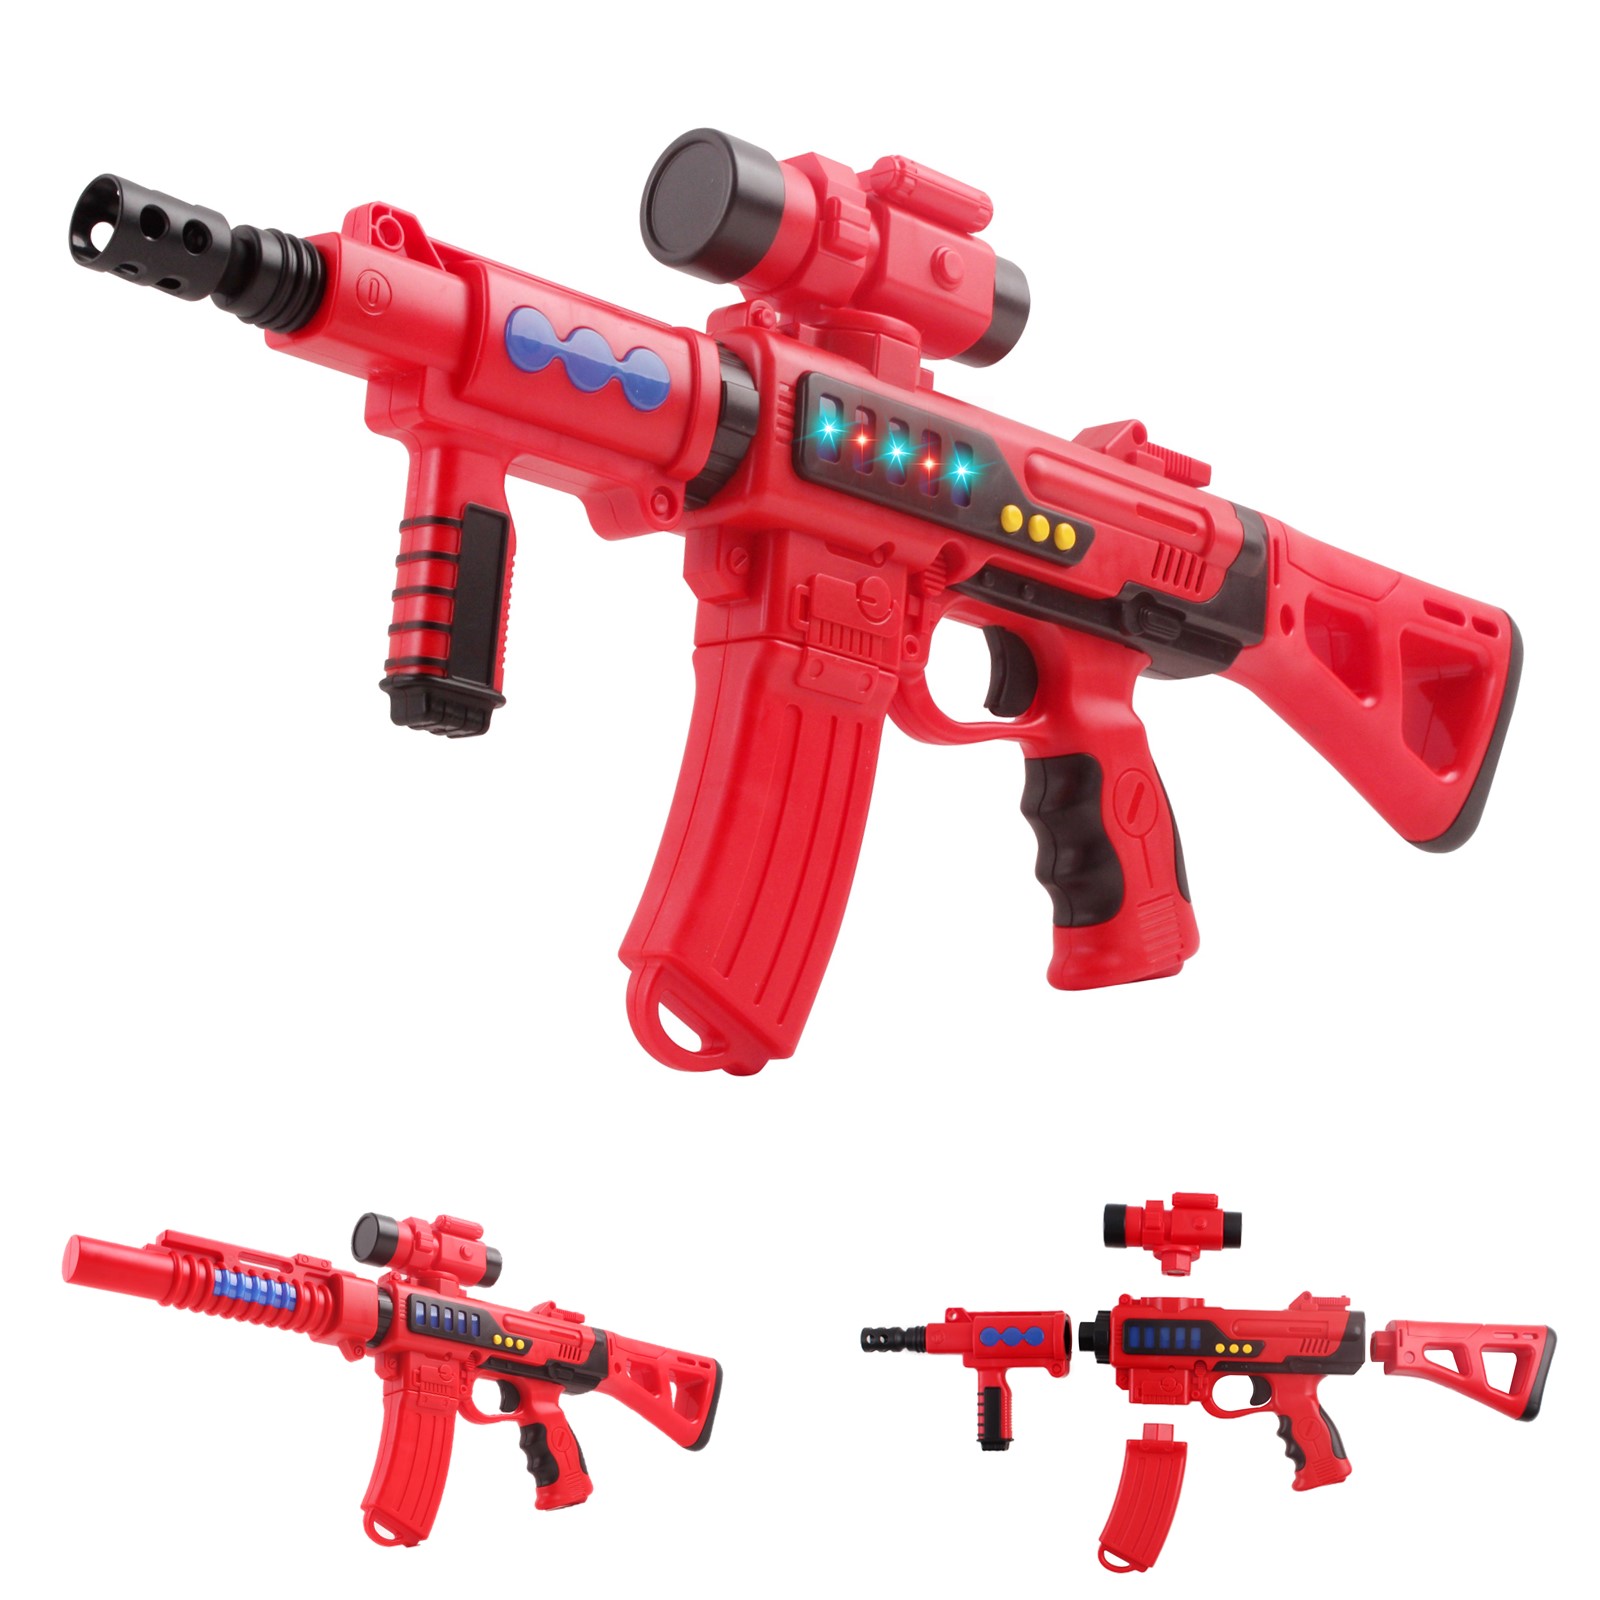 6 Piece Take Apart Gun With Lights And Sounds Scope Featuring 28 Build Options Magnetic Assembly Fun Pretend Play Creative Imagination Building Construction Rifle Action Toys For Children Boys